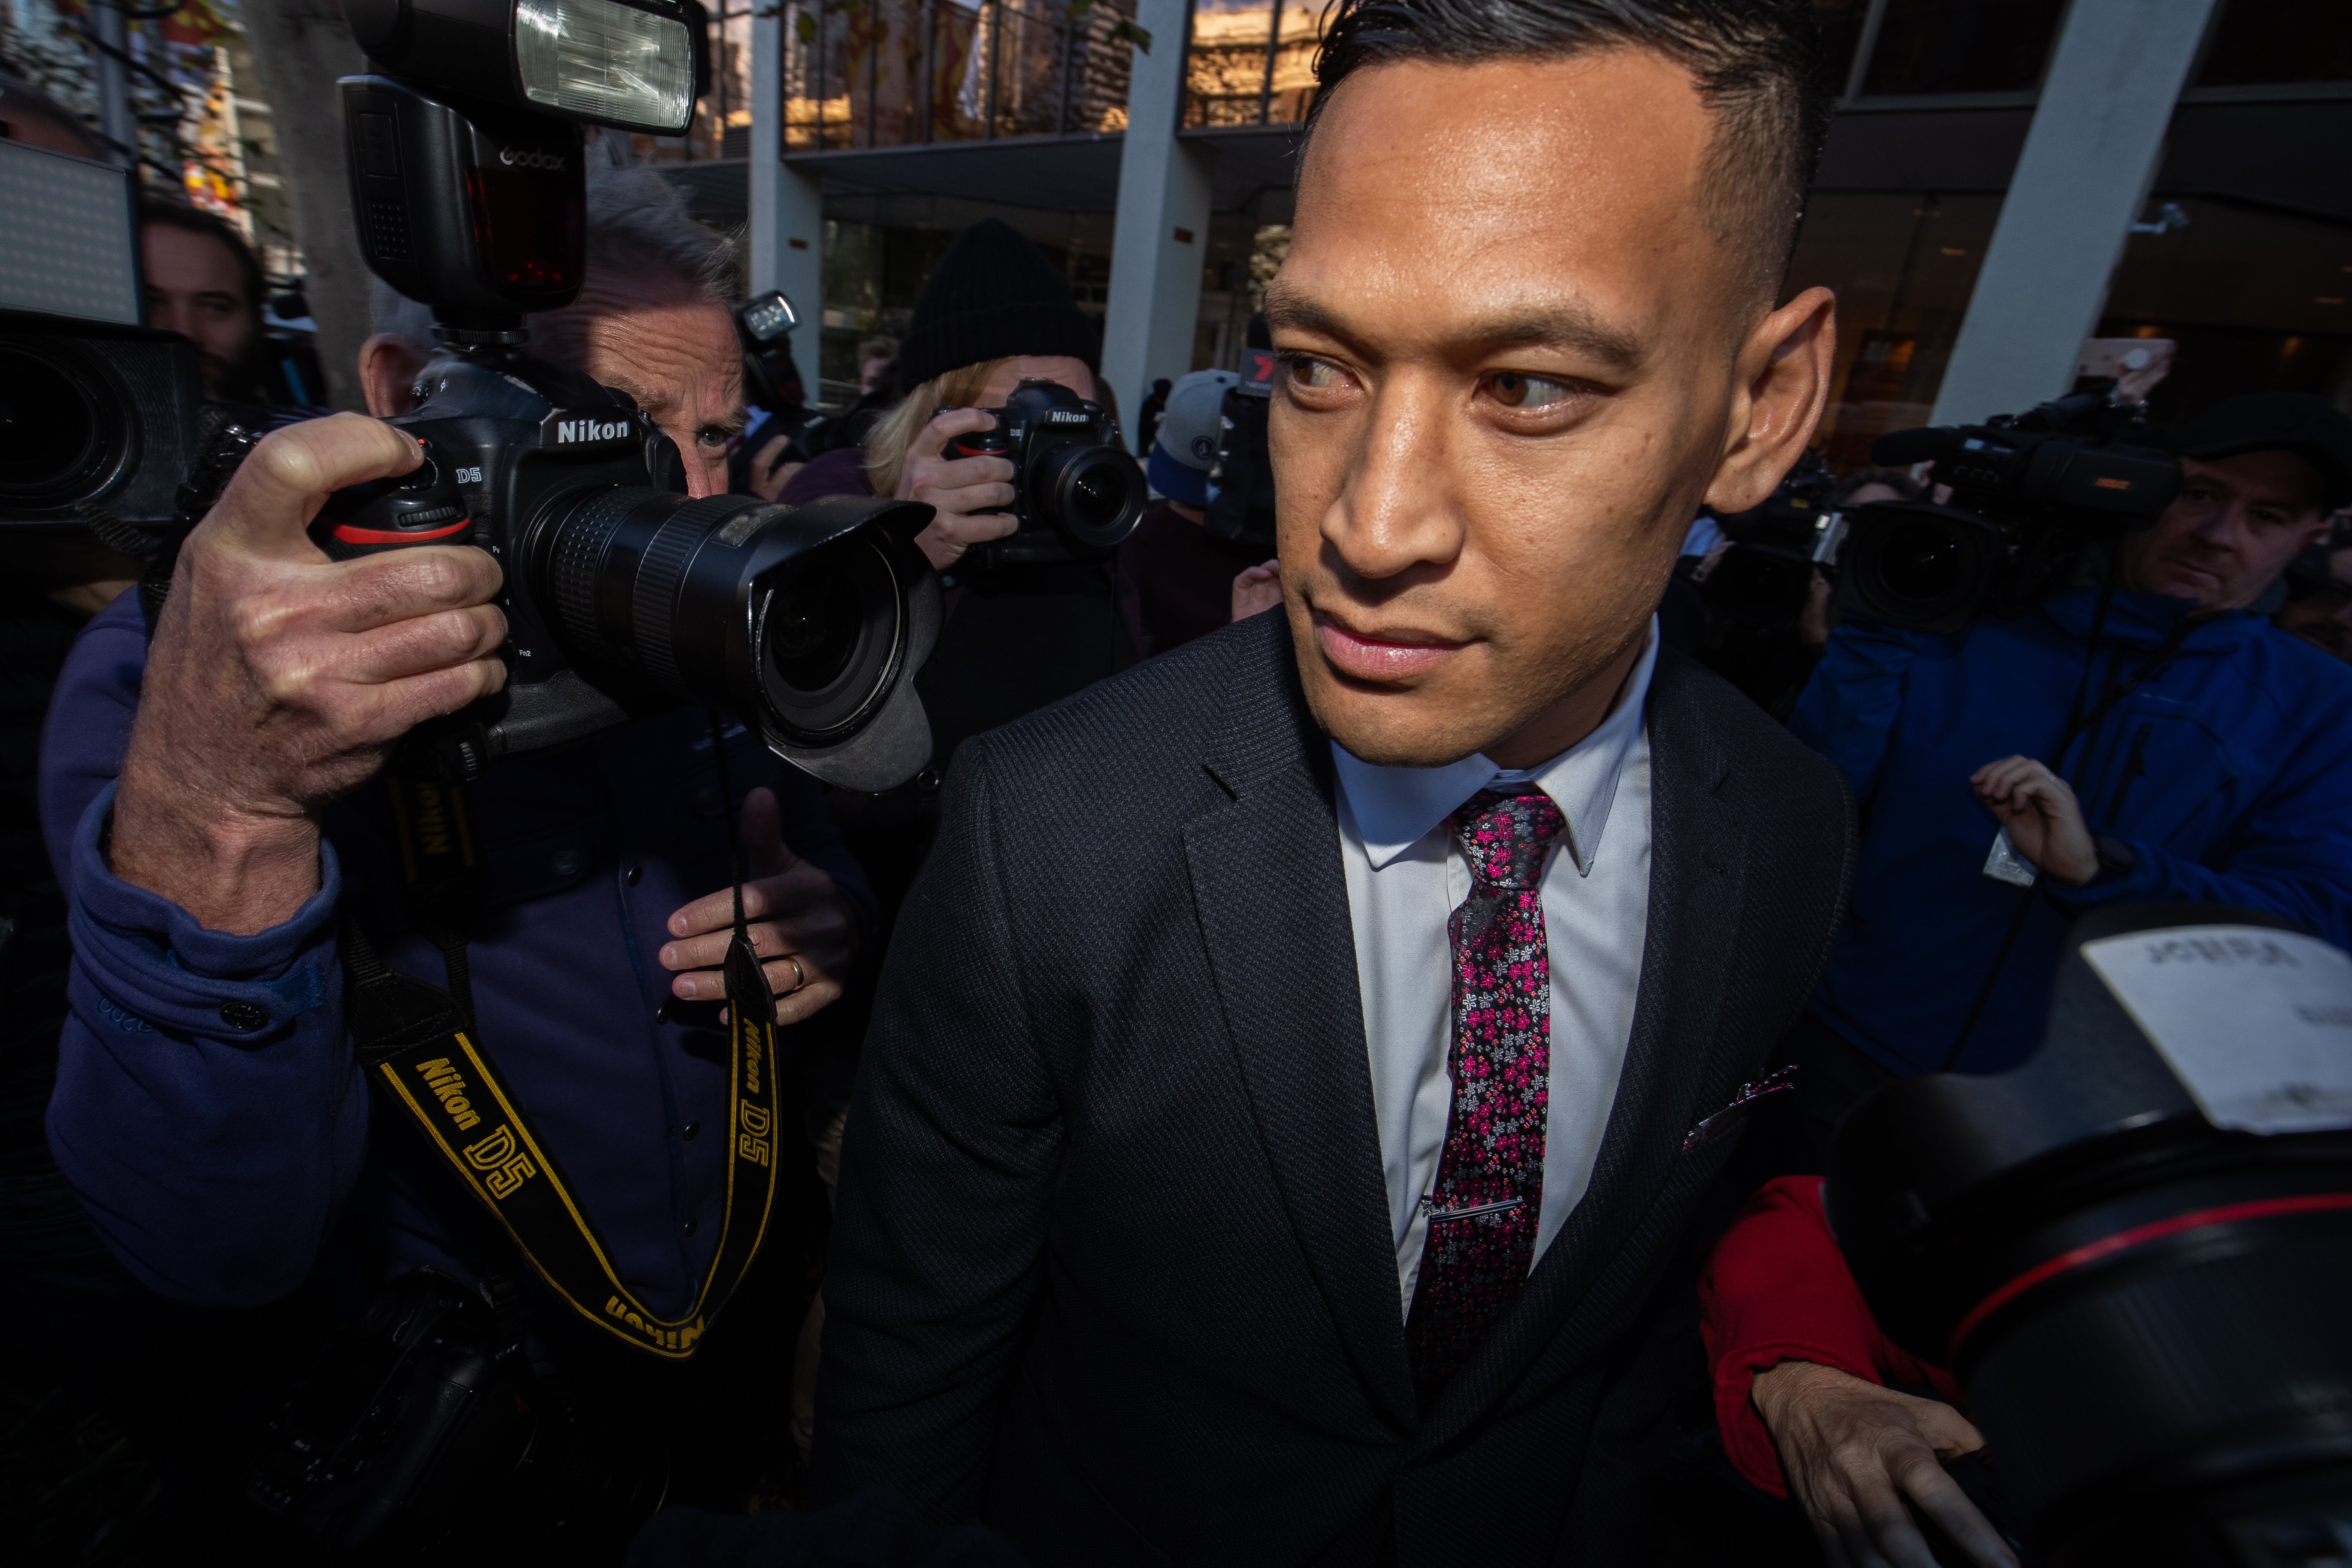 Israel Folau departs his conciliation meeting with Rugby Australia at Fair Work Commission on June 28, 2019 in Sydney.